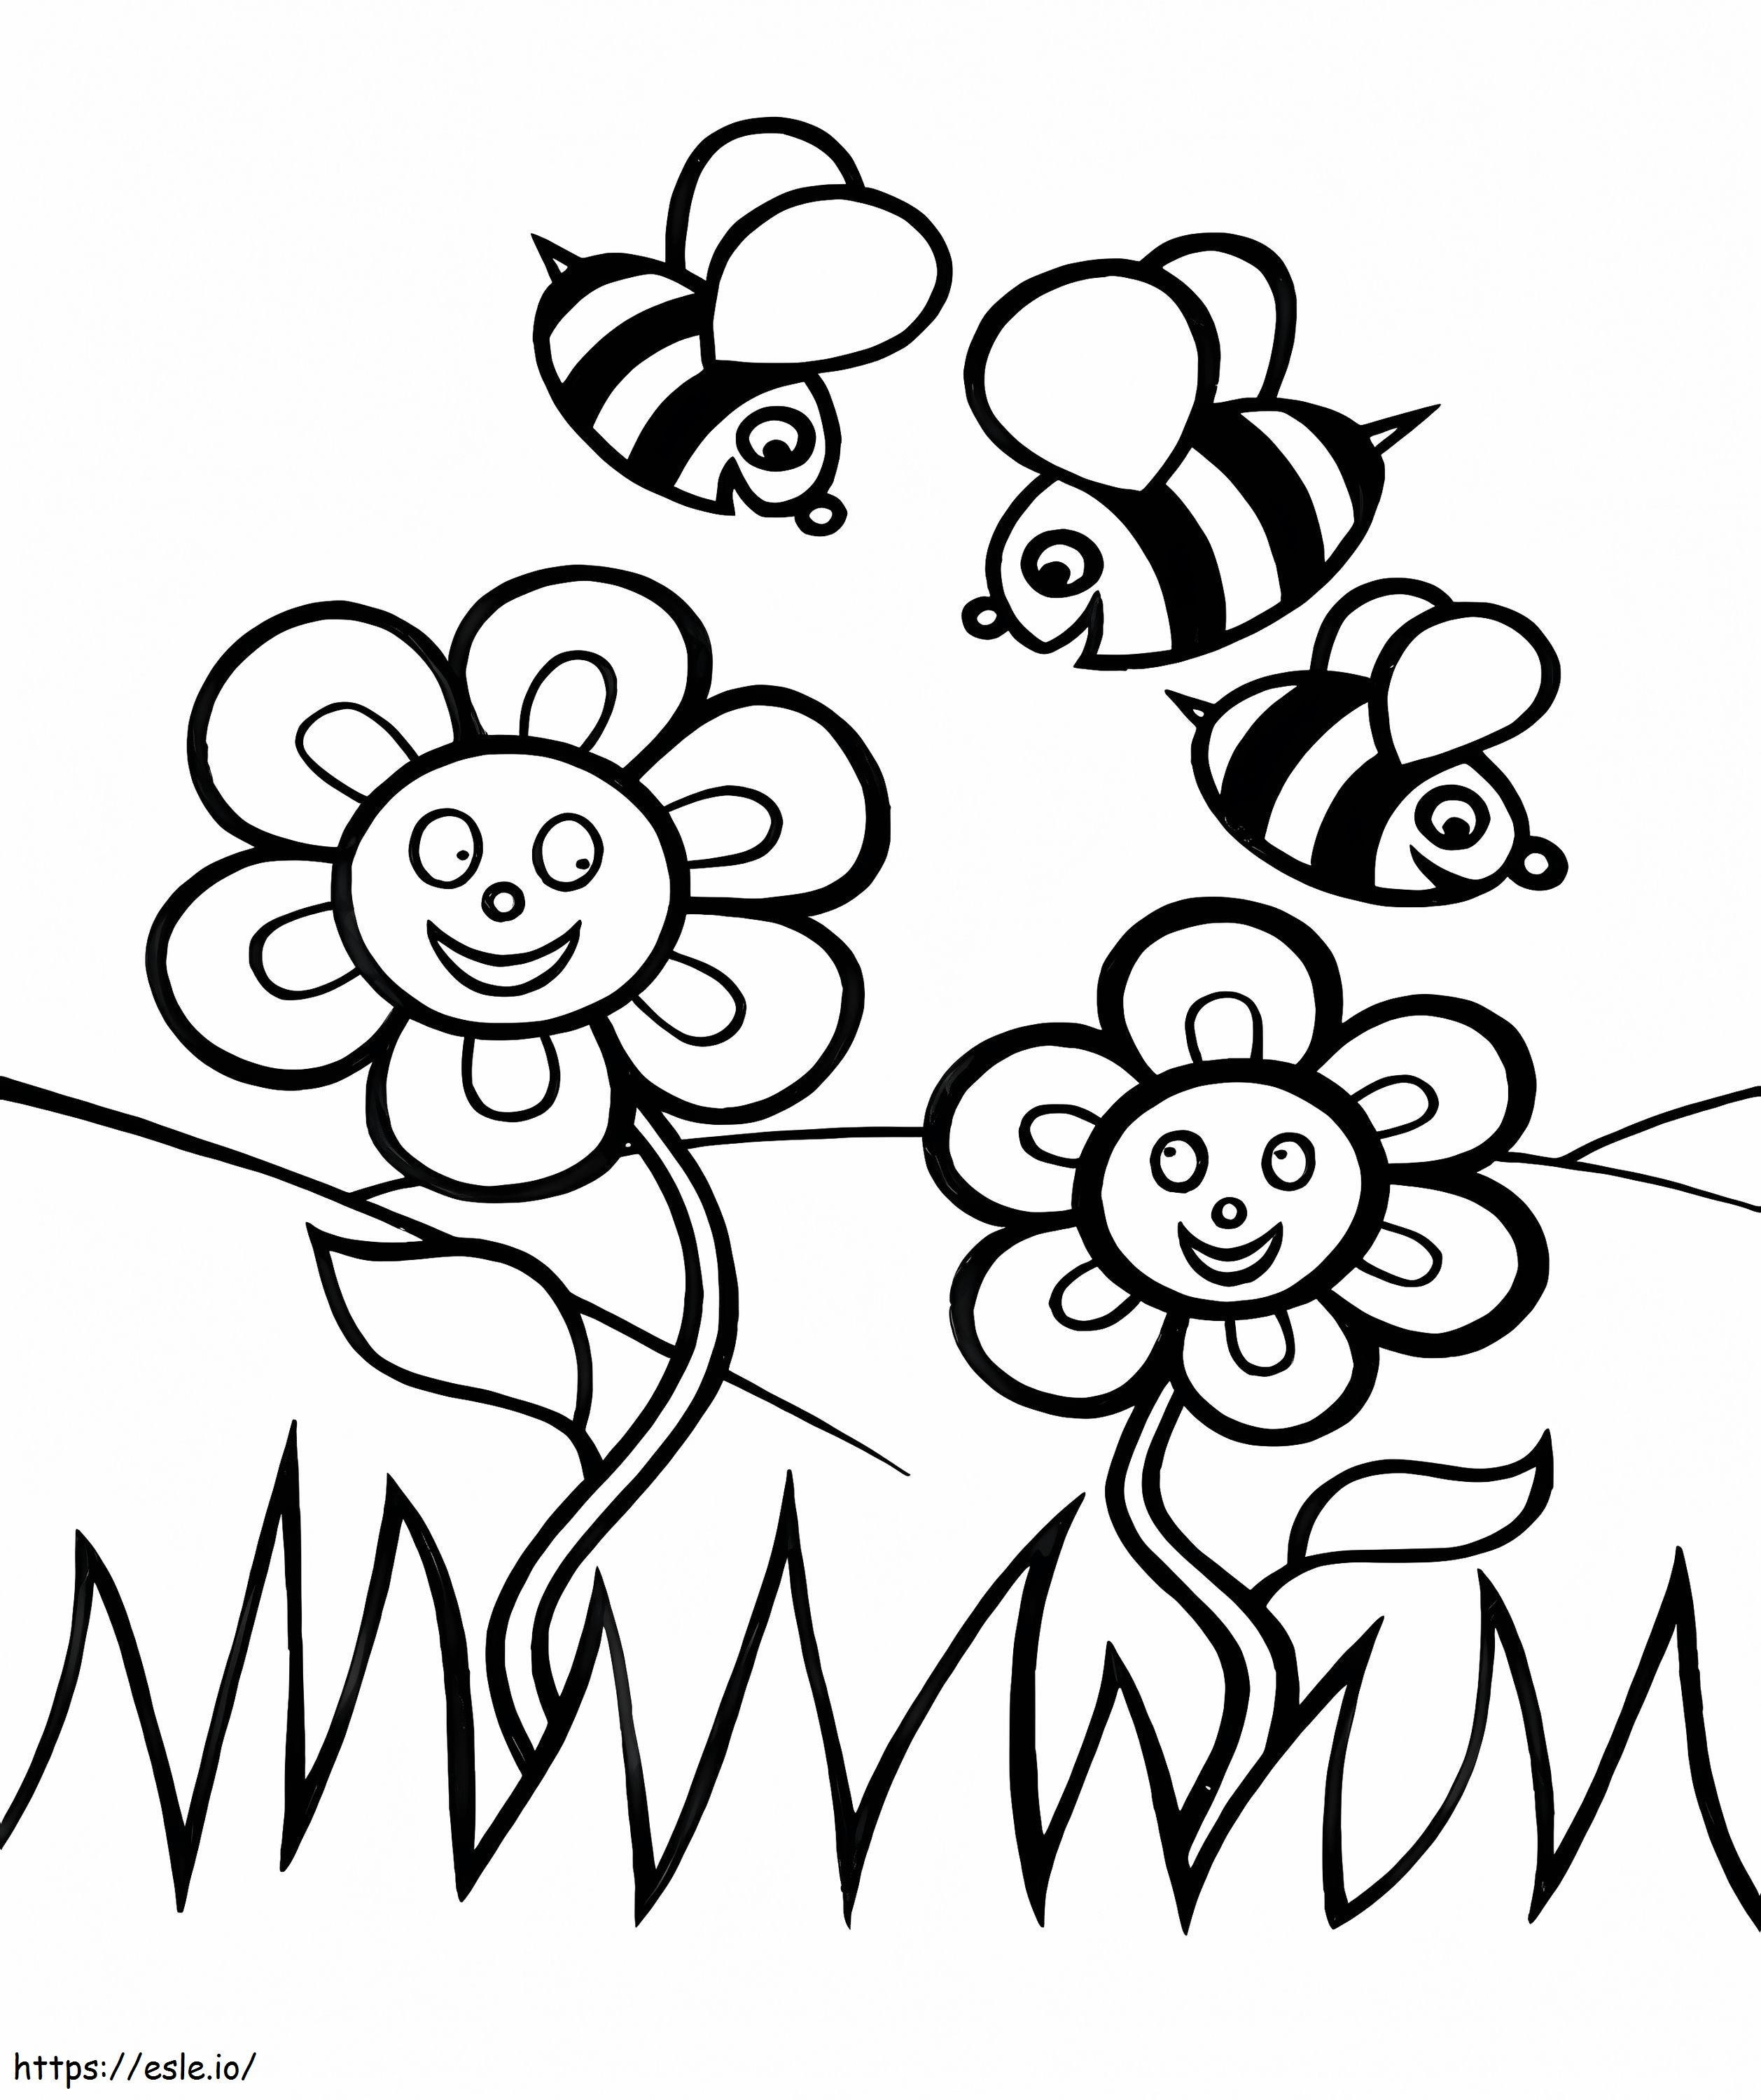 Three Bees With Flowers coloring page